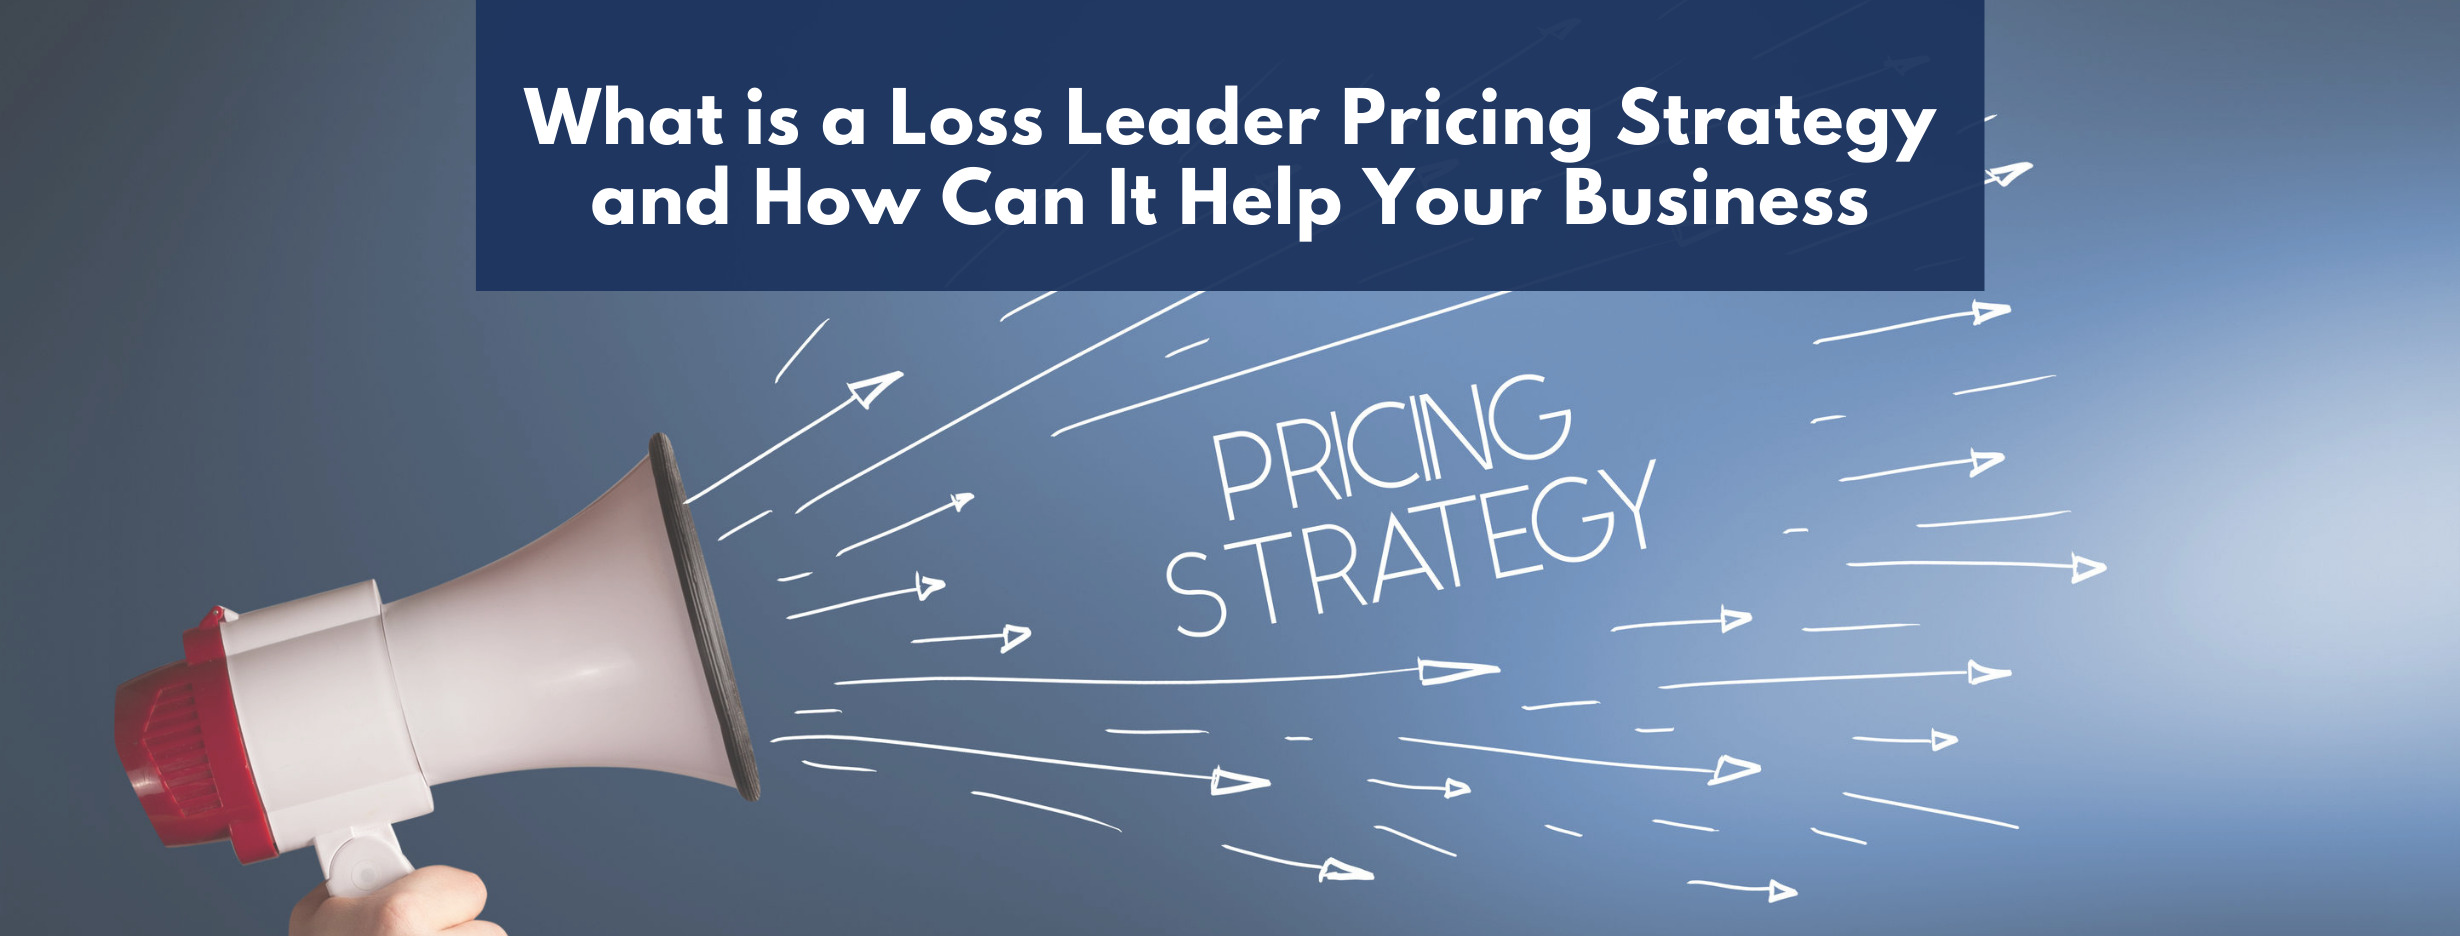 What is a Loss Leader Pricing Strategy and How Can It Help Your Business